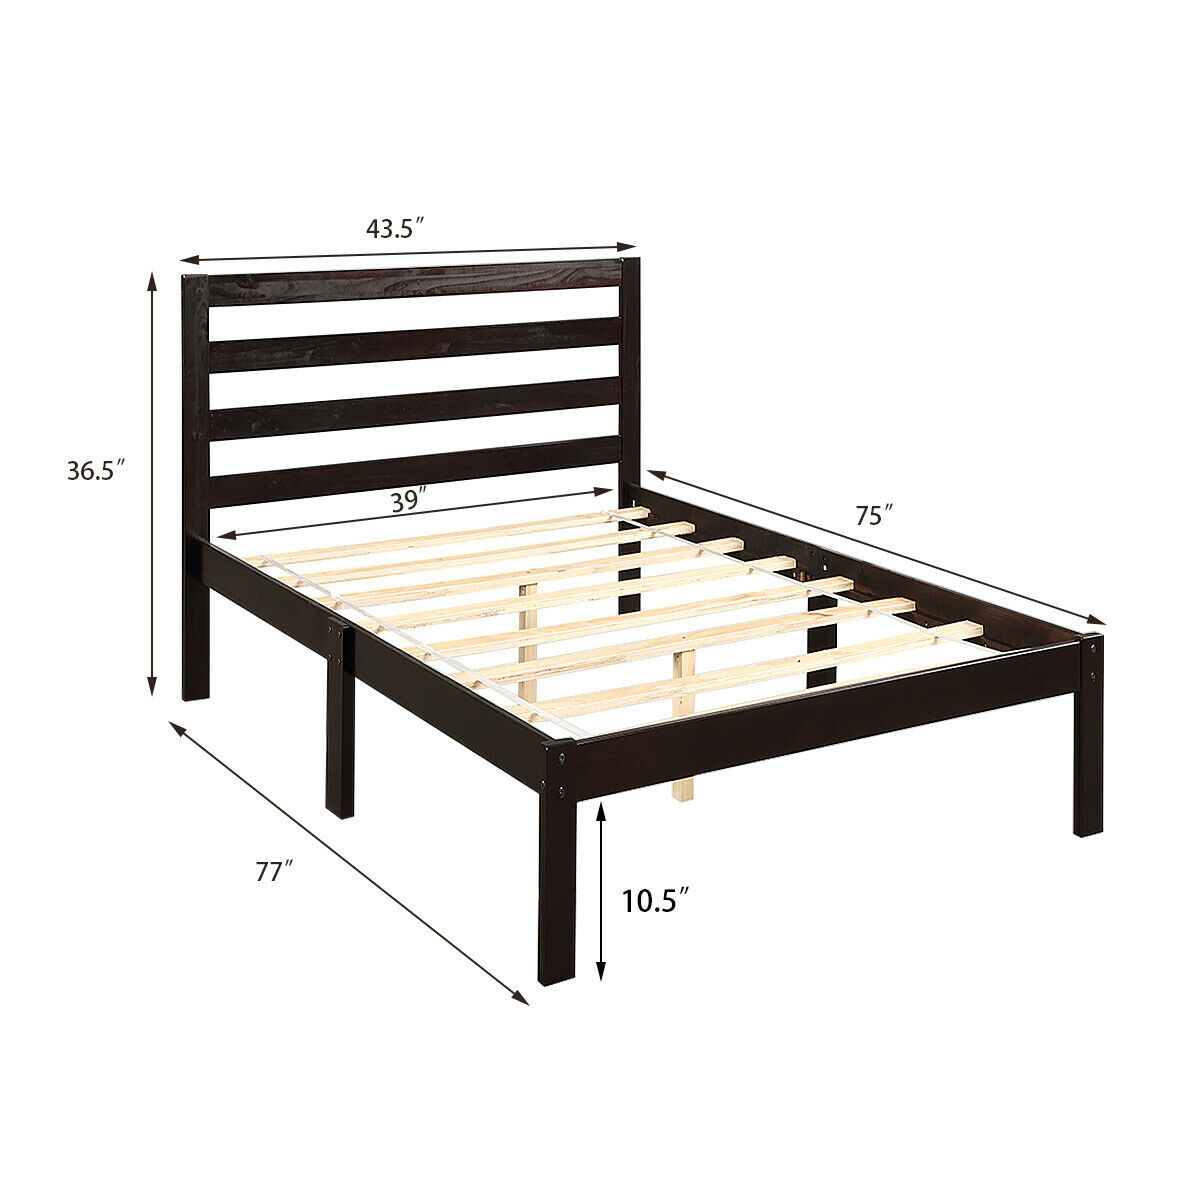 Gymax Solid Wood Platform Bed W, Twin Xl Bed Frame With Wood Slats